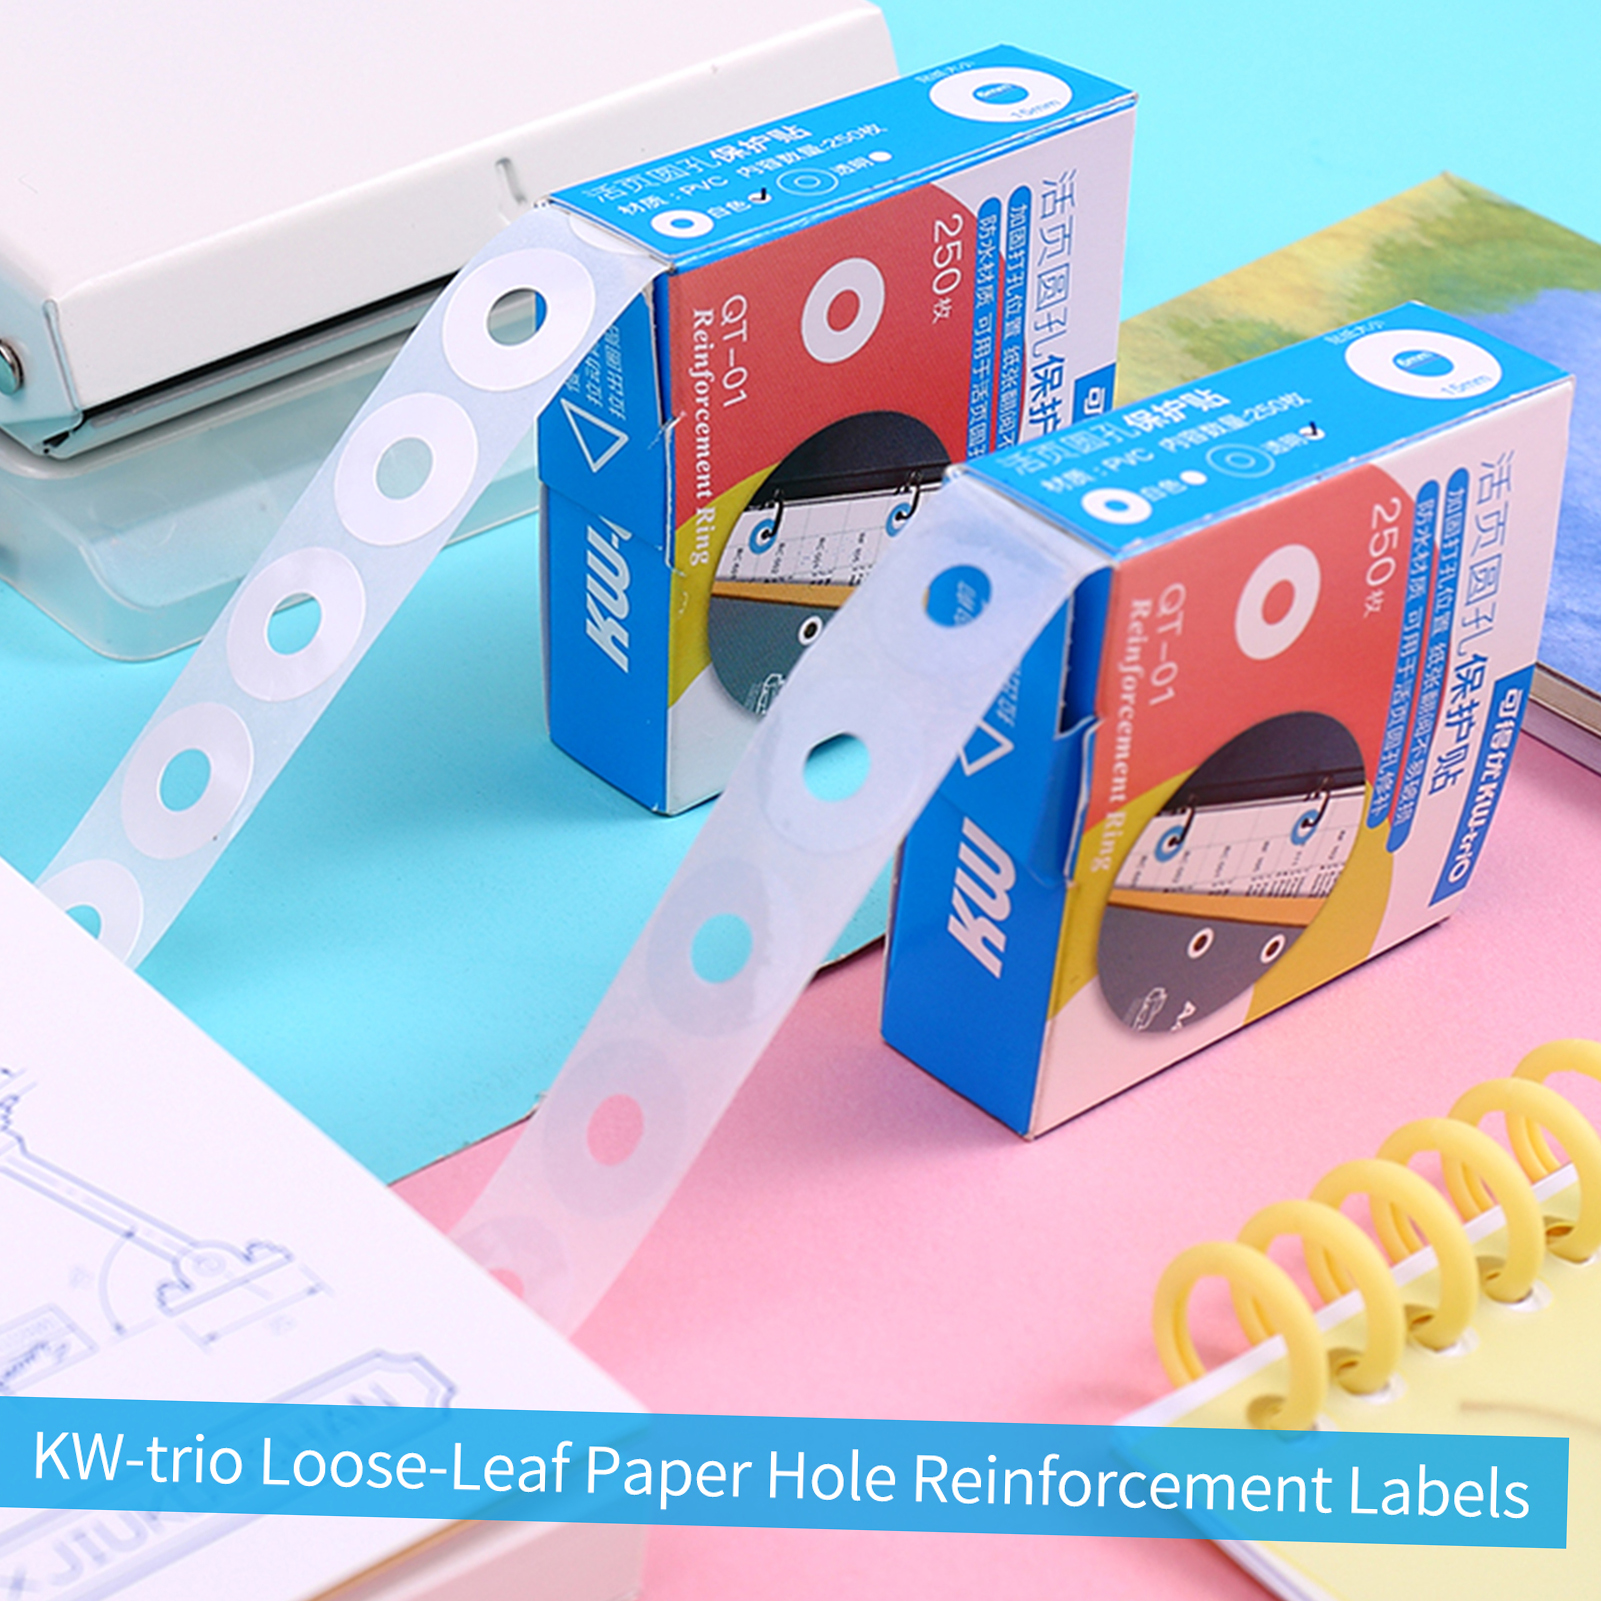 Tomshine Loose- Paper Hole Reinforcement Labels Round Stickers Self-Adhesive Hole Punch Protector for Office School Home Supplies, 250 Labels, Blue